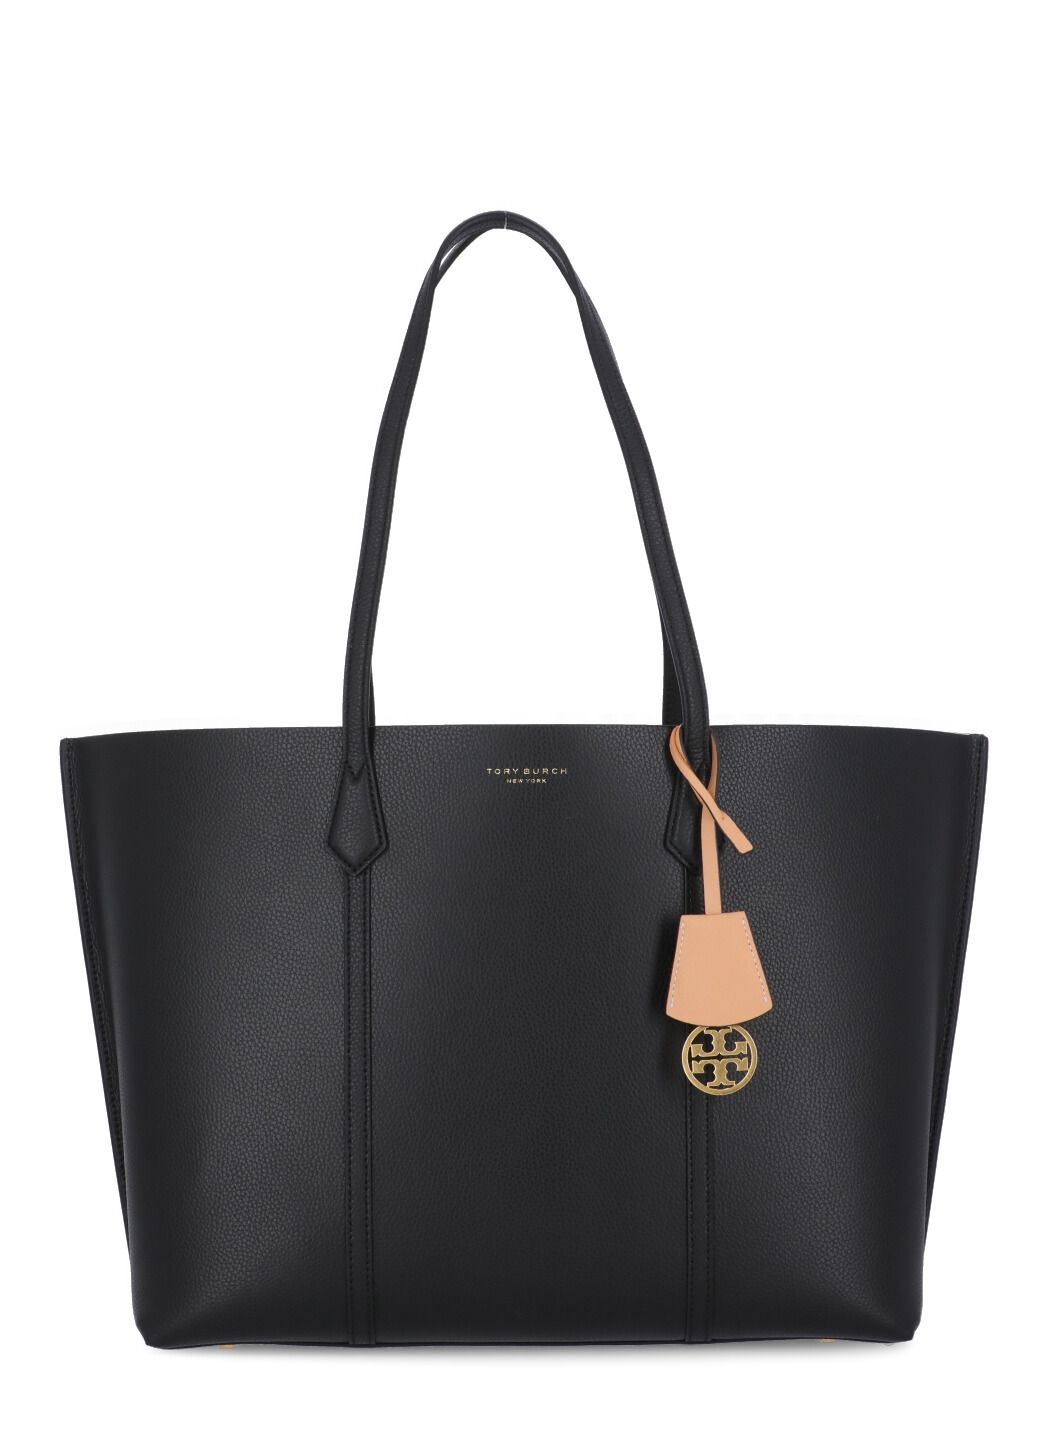 Perry Tote shopping bag